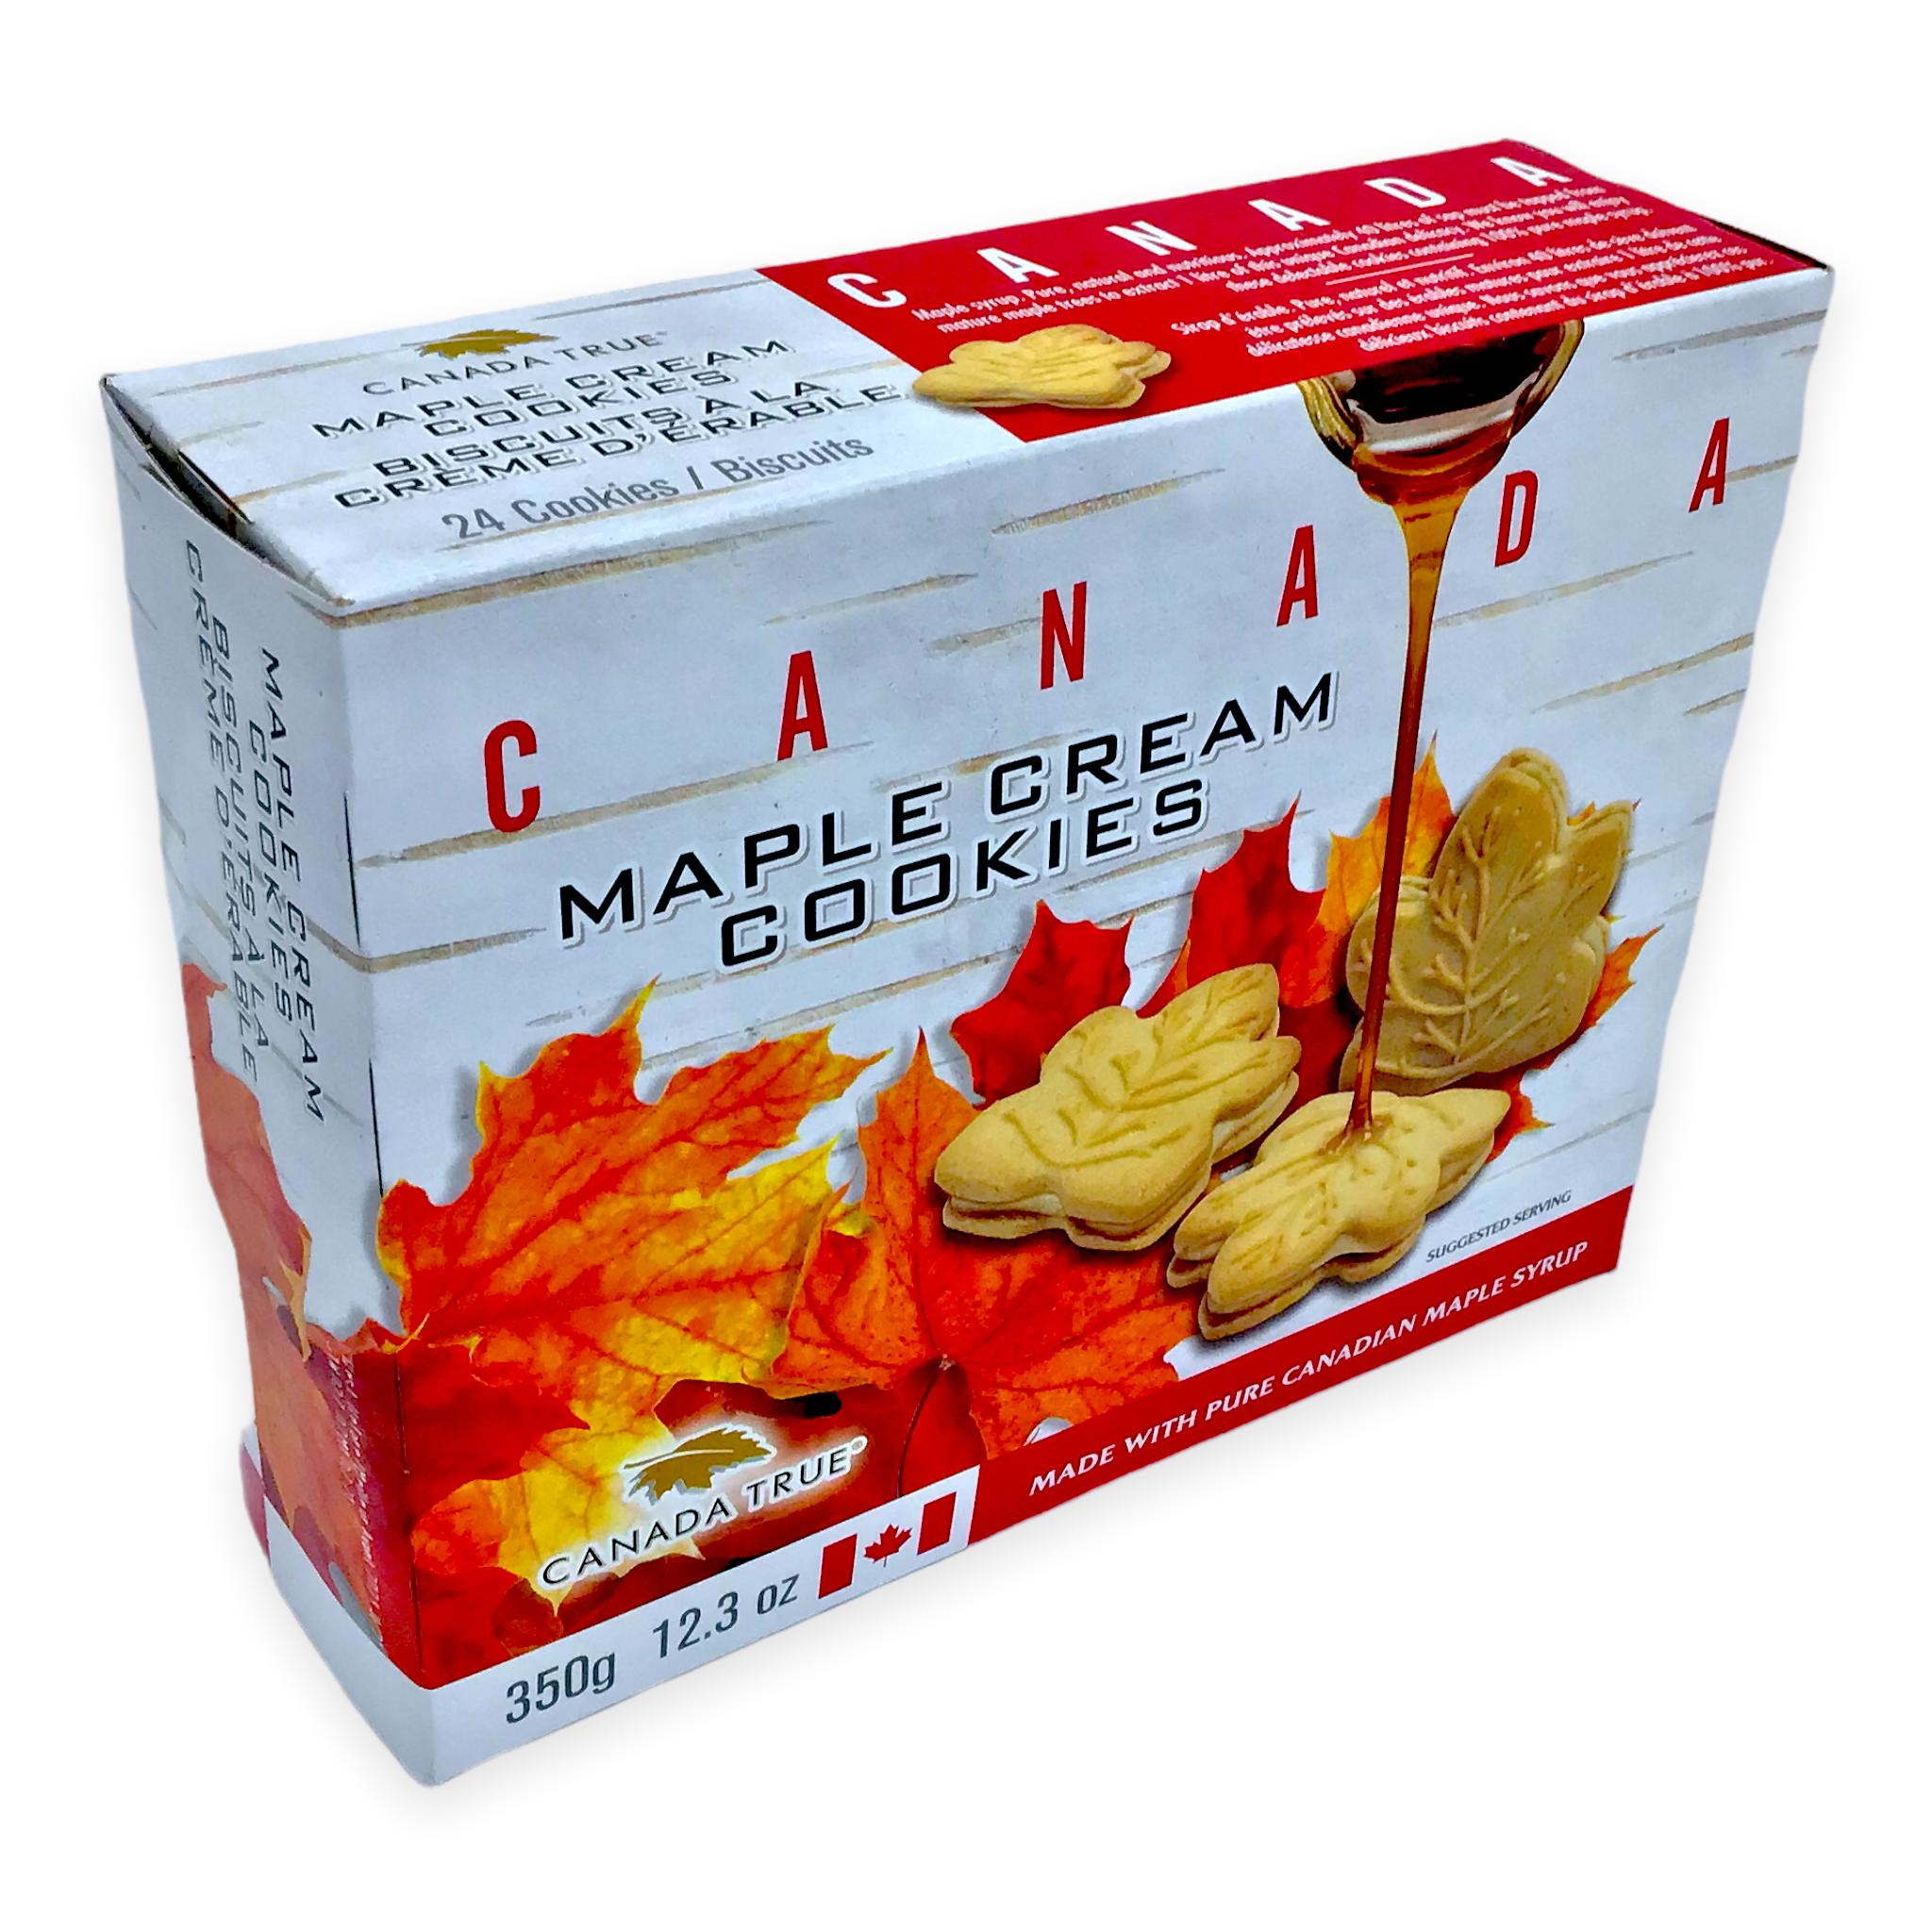 CANADA TRUE Maple Cream Cookies, 24 Cookies per Pack 100% Real Canadian Maple Syrup 350g